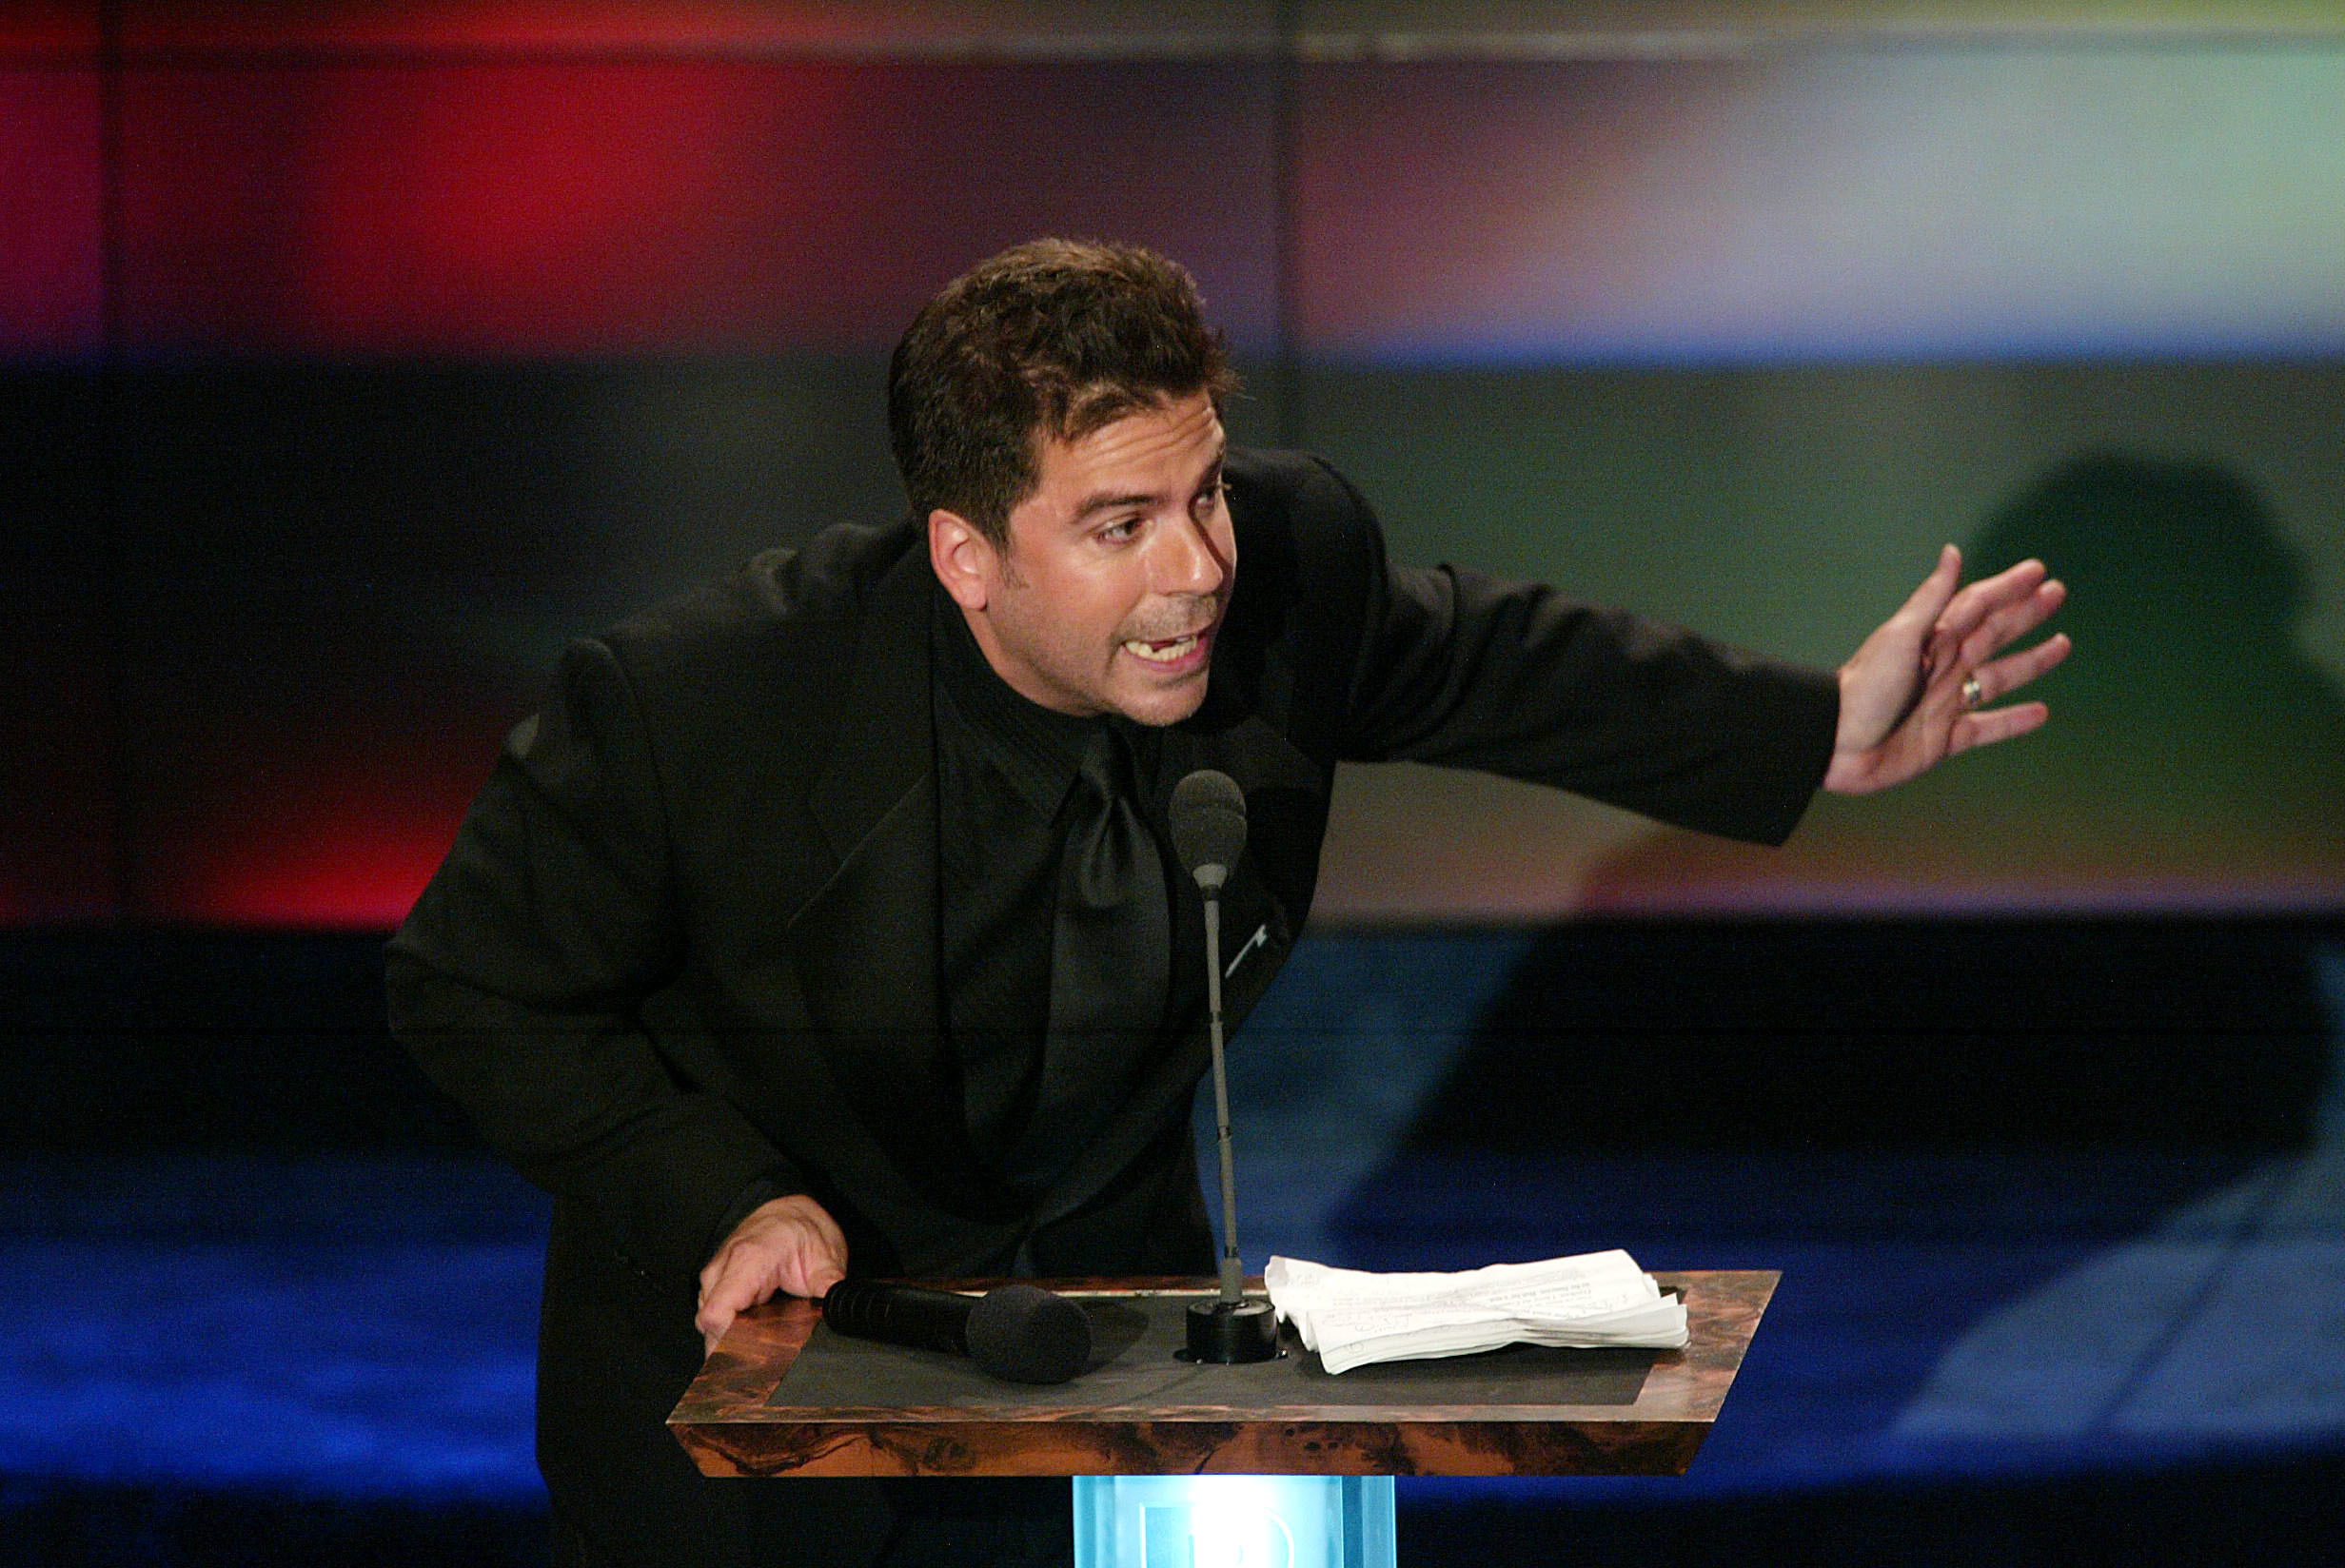 <p>The late, great Greg Giraldo was fearless any time he performed, whether it was on a roast (he did eight of them), a comedy club stage, or <a href="https://www.youtube.com/watch?v=ymltNm4p2VY&t=2s" rel="noopener noreferrer">annihilating Denis Leary</a> on "Tough Crowd." There's literally <a href="https://www.youtube.com/watch?v=KG1zbxRFqOQ" rel="noopener noreferrer">an hour's worth</a> of great Giraldo roast jokes, but he was particularly savage on the Chevy Chase Roast. Giraldo explained he couldn't dream of Chase's career — "making three great movies and 40 (crappy) ones." And, the most brutal part, "You've made 40 movies, and Al Franken is the biggest movie star who showed up. An O.J. roast would have had more star power!" </p><p><a href='https://www.msn.com/en-us/community/channel/vid-cj9pqbr0vn9in2b6ddcd8sfgpfq6x6utp44fssrv6mc2gtybw0us'>Follow us on MSN to see more of our exclusive entertainment content.</a></p>